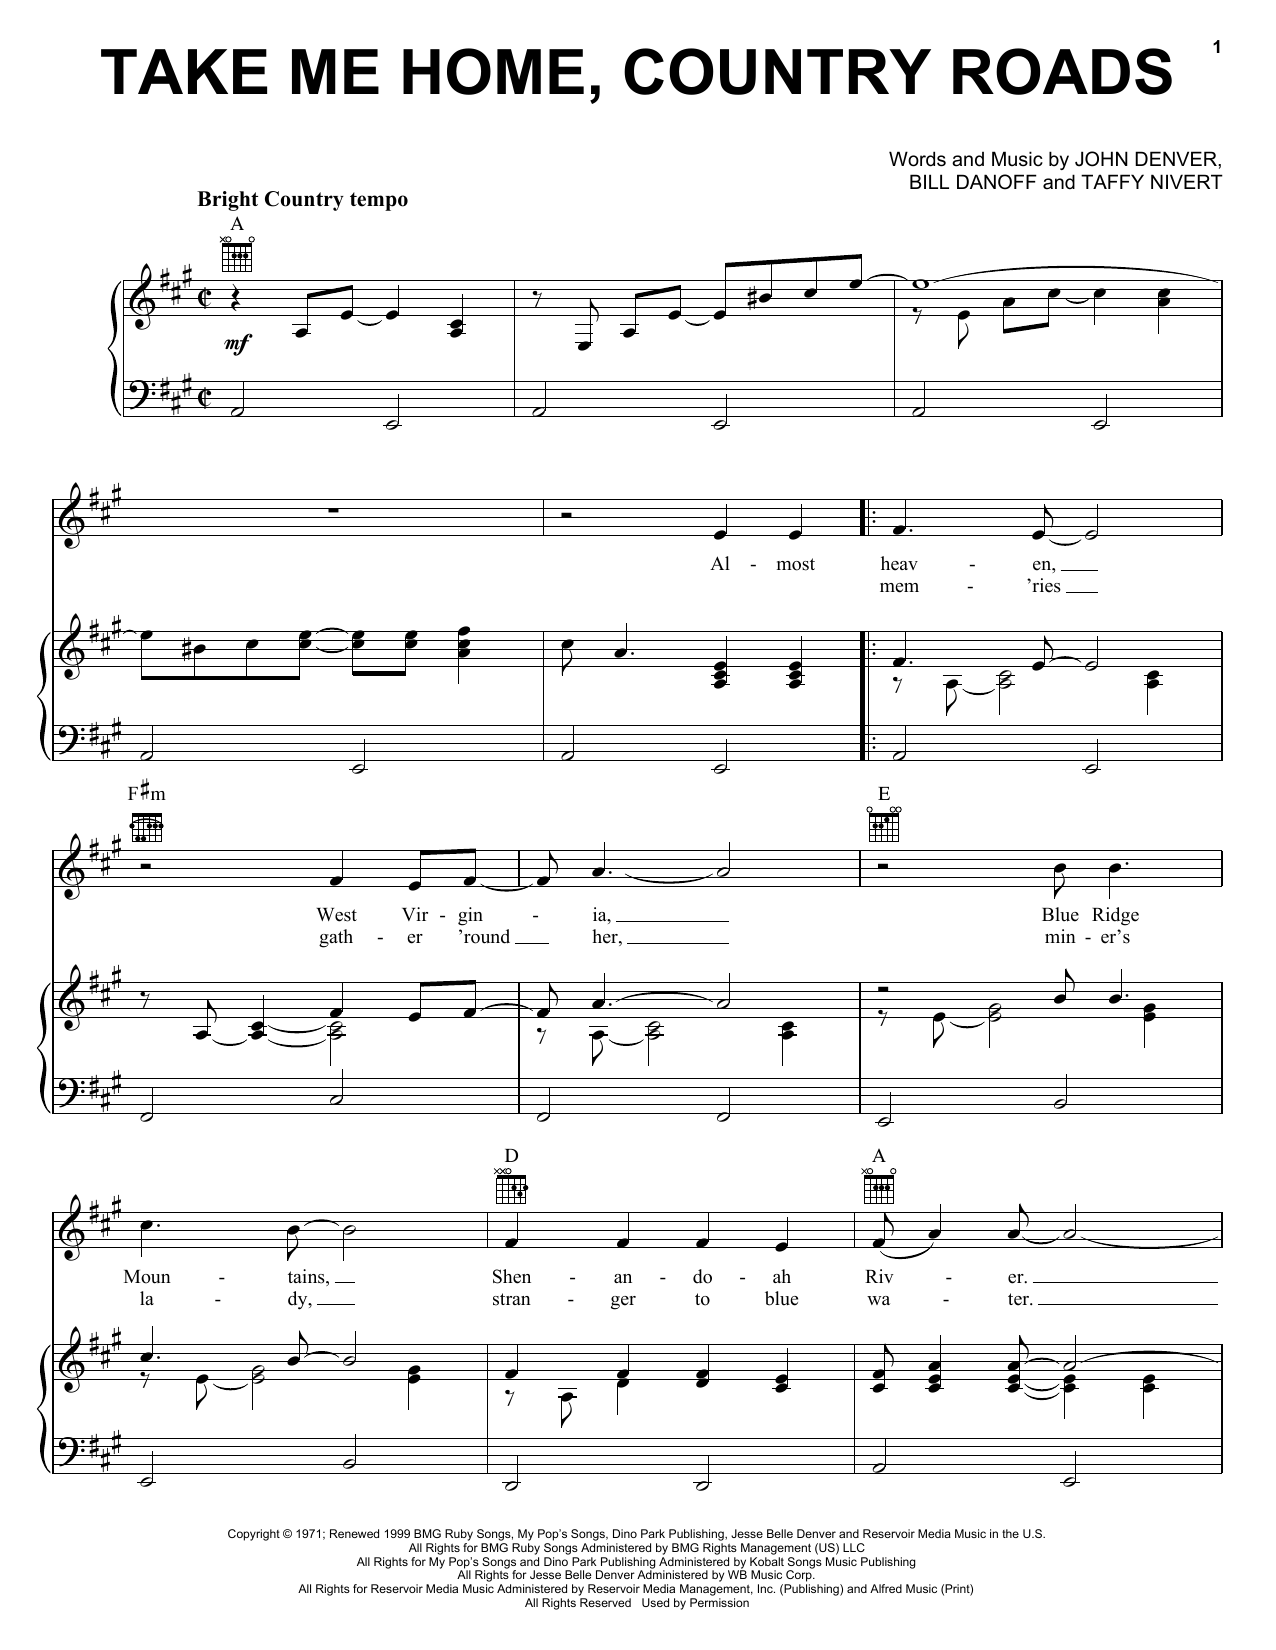 John Denver Take Me Home, Country Roads sheet music notes and chords. Download Printable PDF.